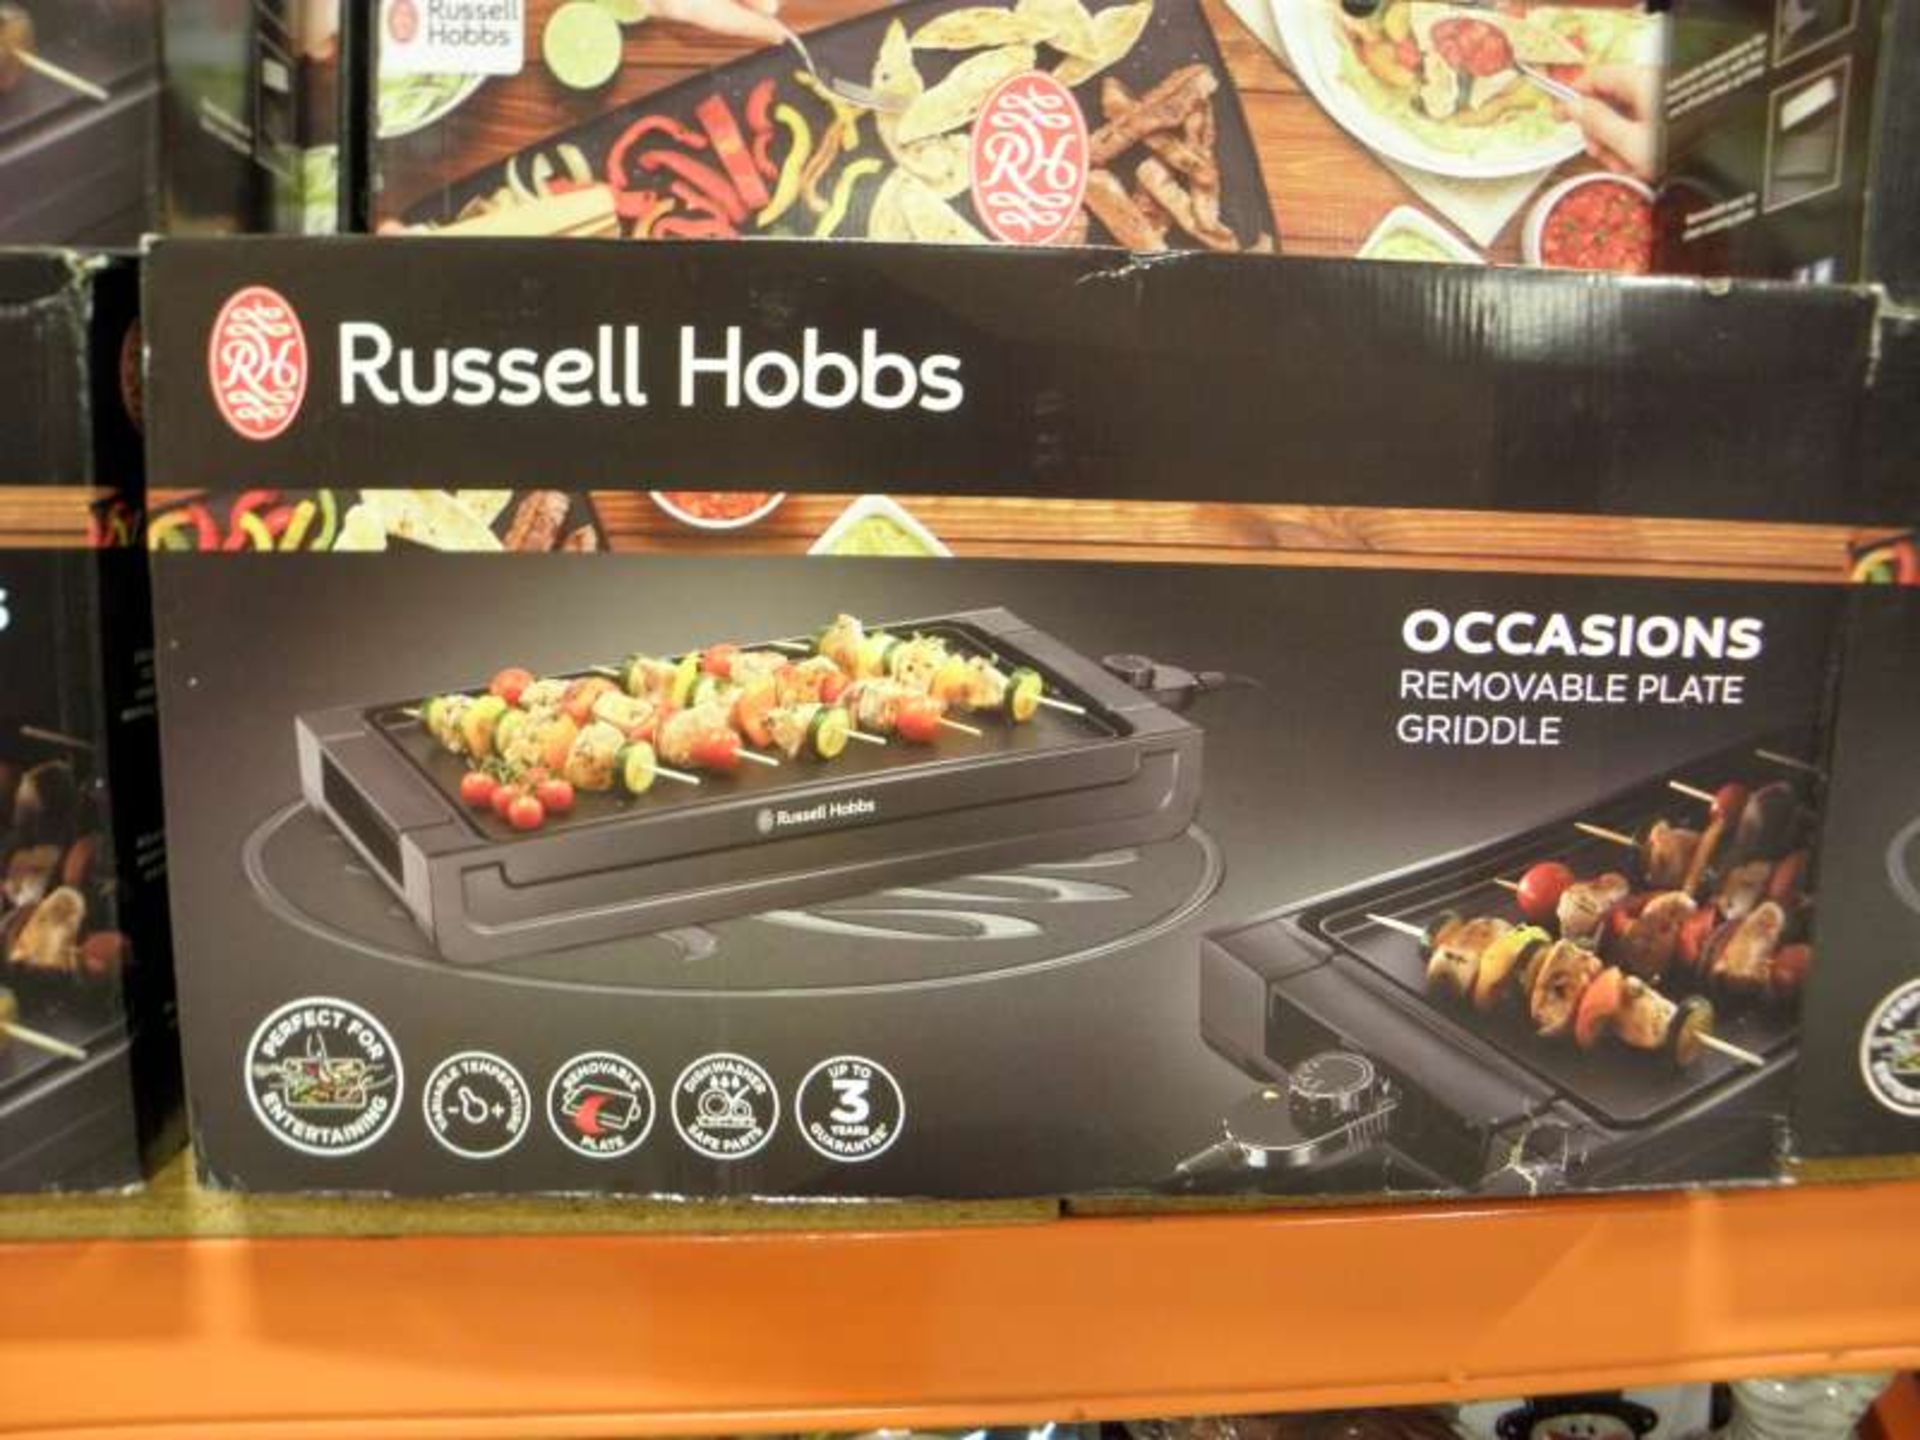 6 X BRAND NEW BOXED RUSSELL HOBBS OCCASIONS REMOVABLE PLATE GRIDDLE